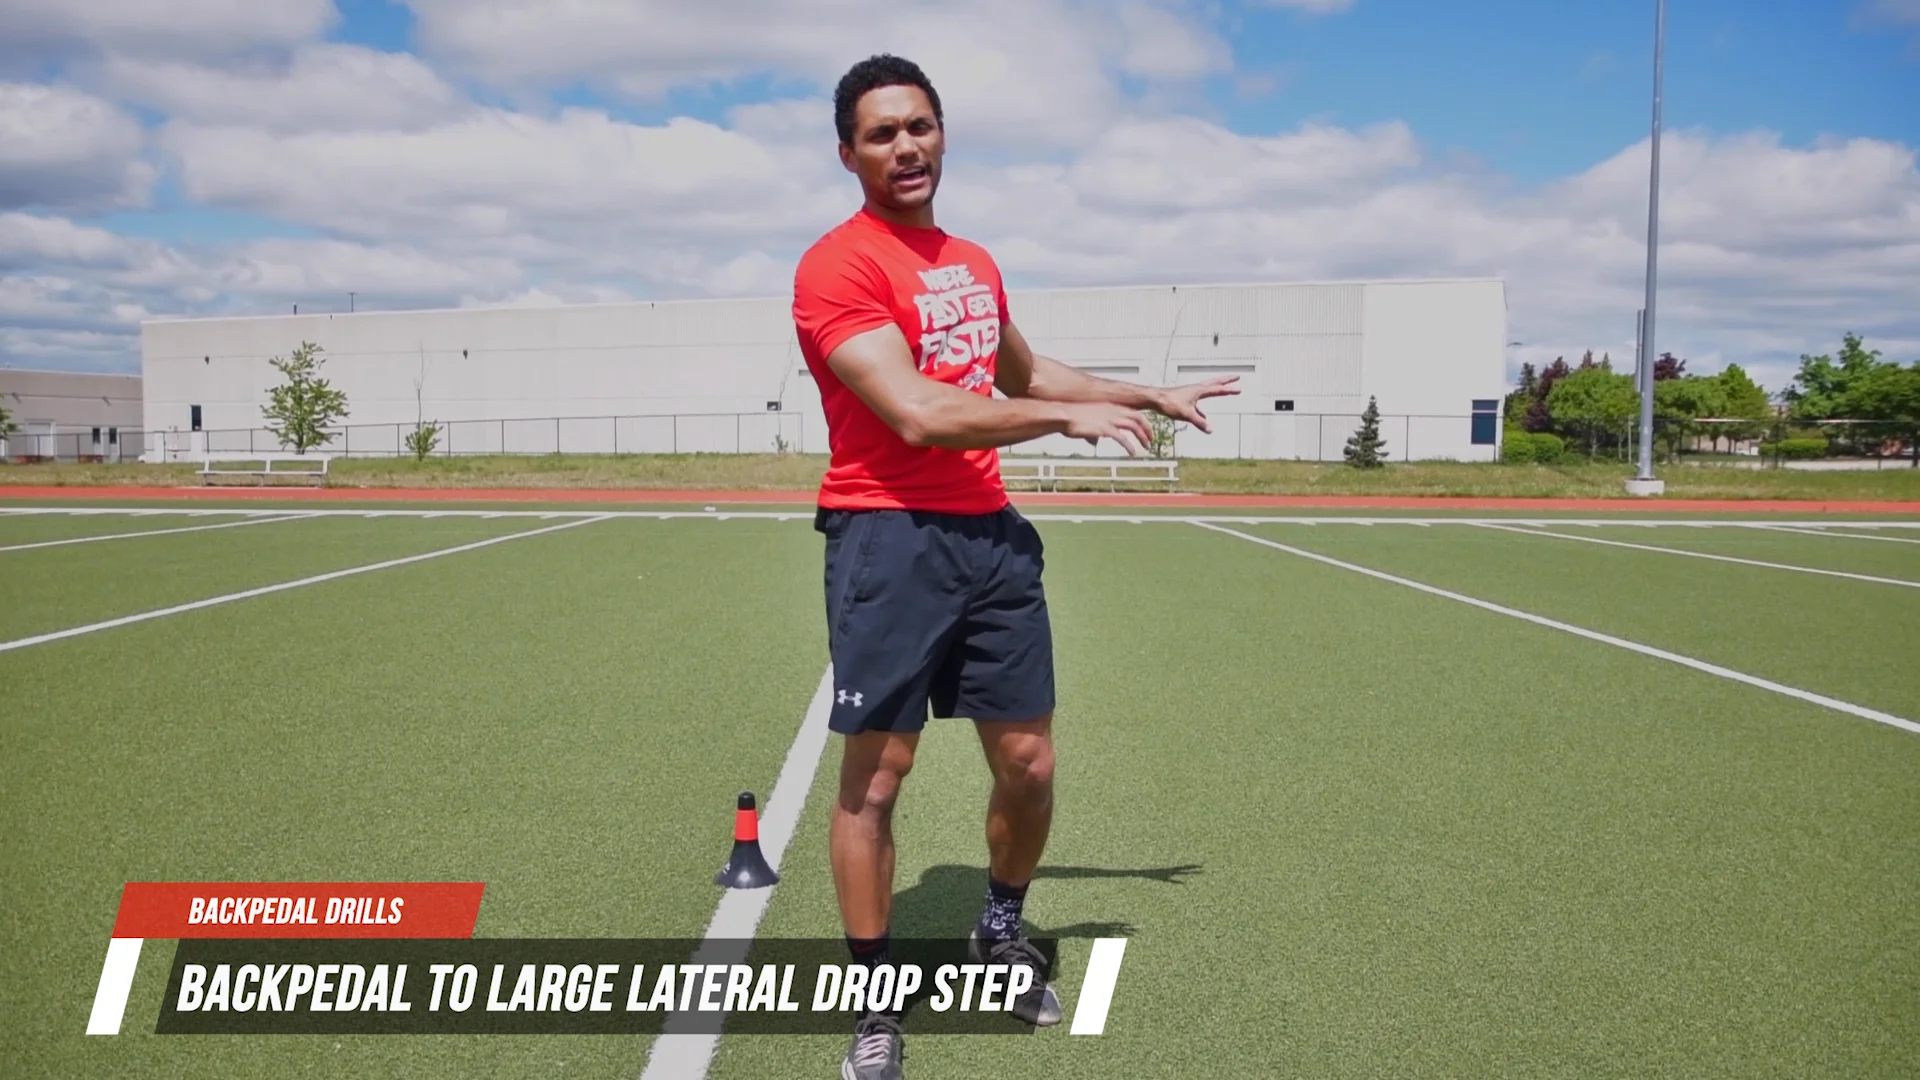 Weighted Shift Ball Workout (English) on Vimeo